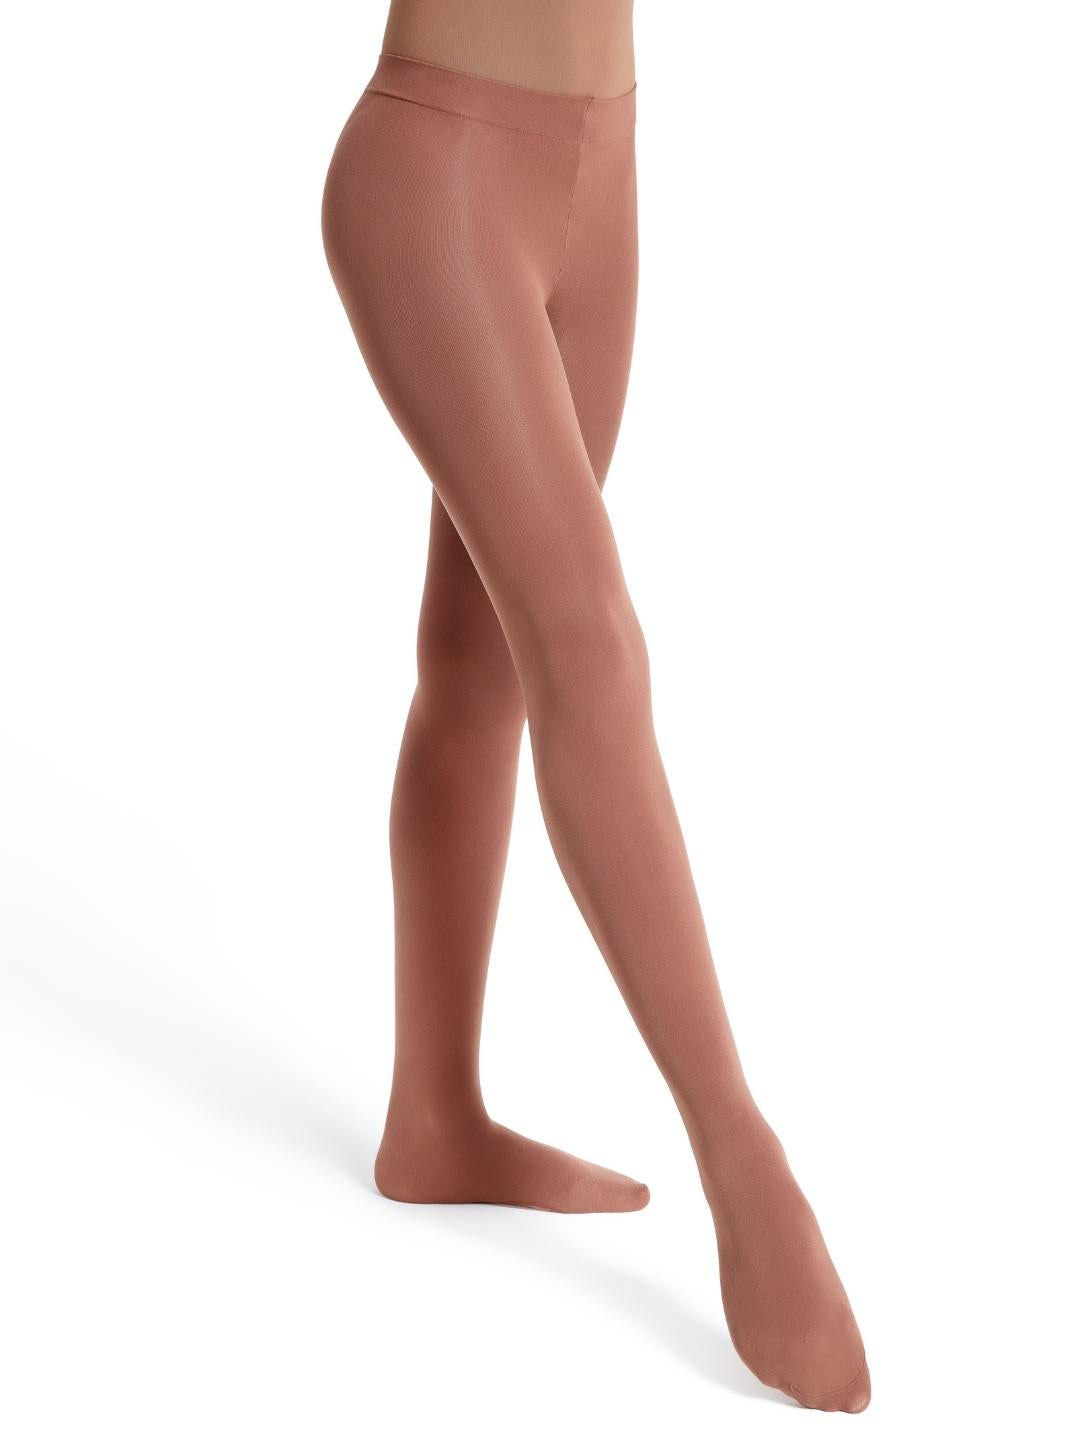 Capezio transition Convertible unisex tights Chestnut brown from The Collective Dancewear